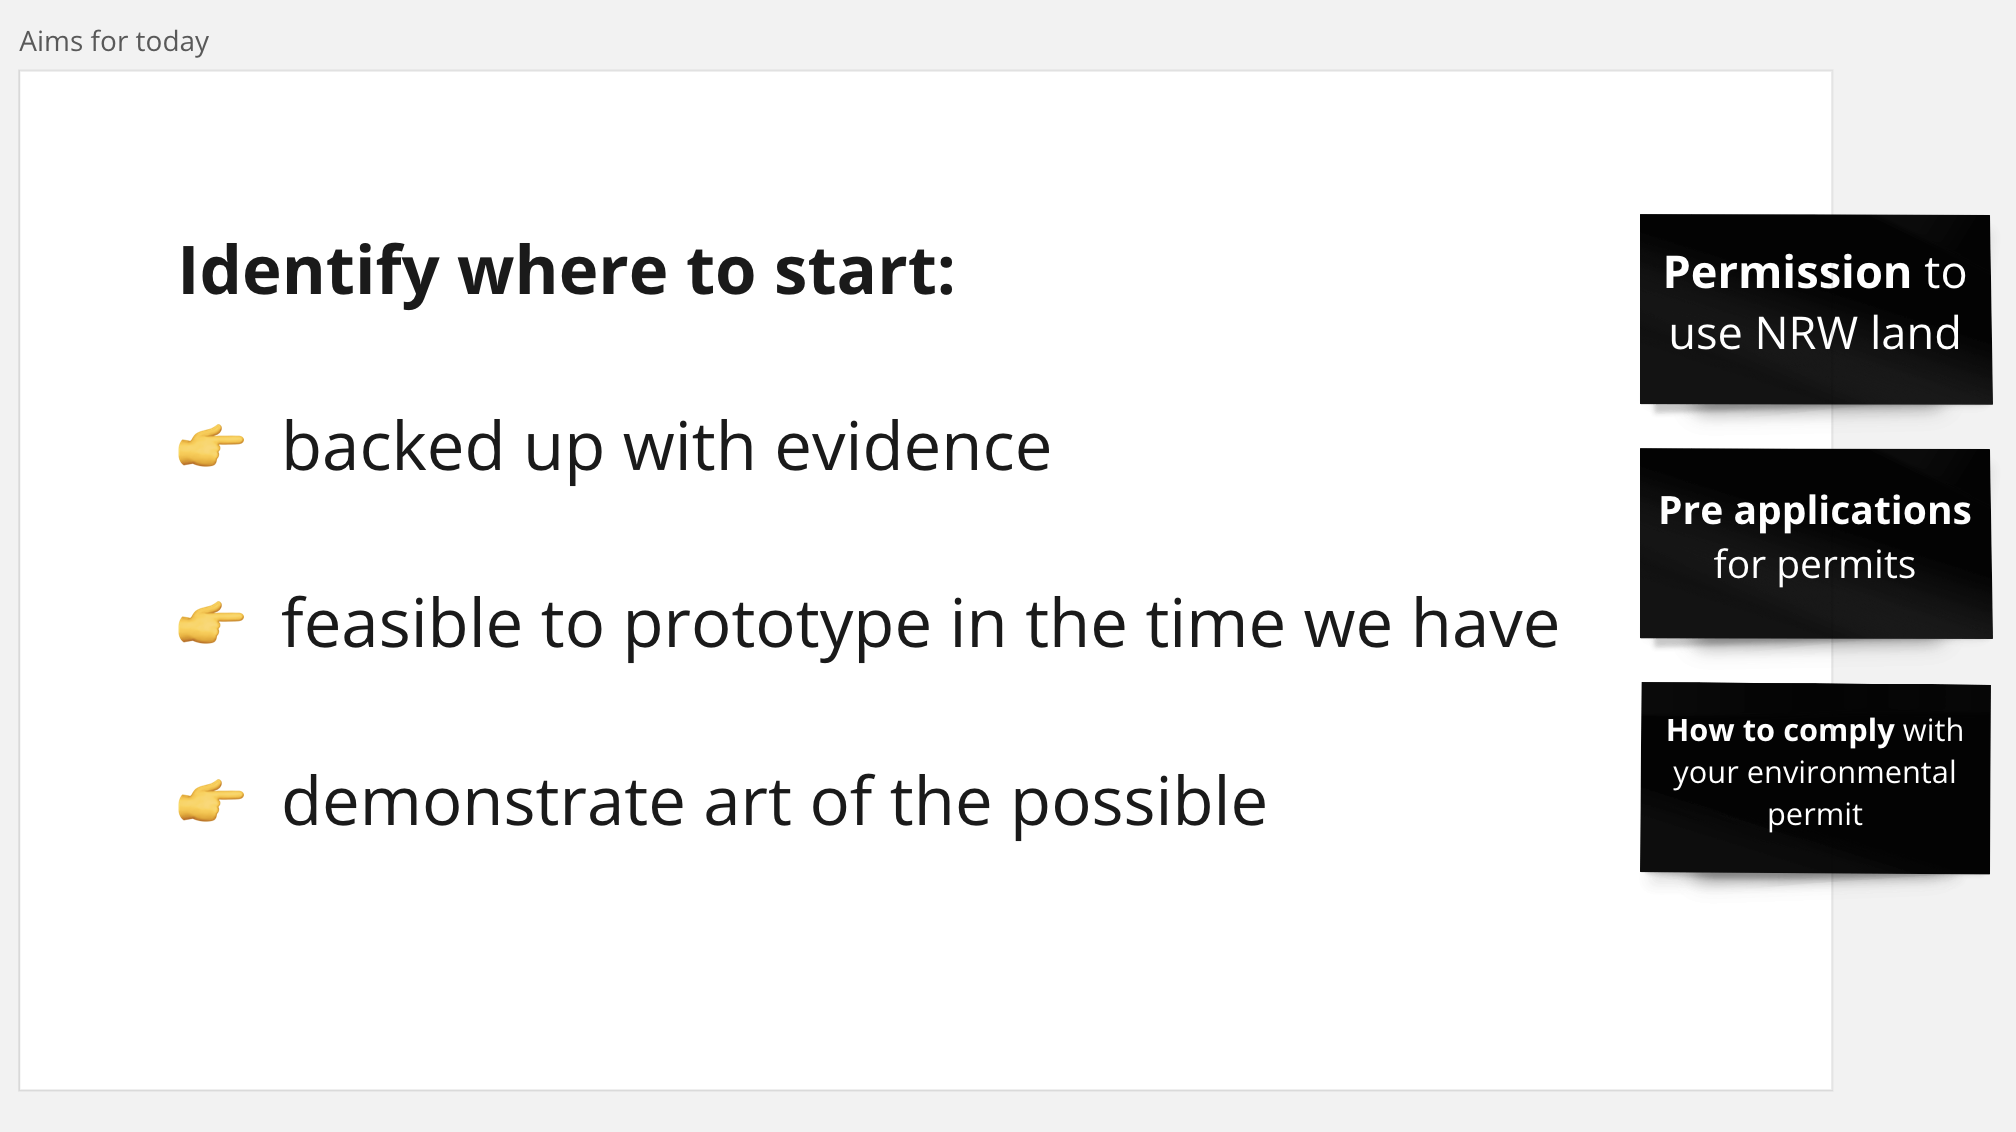 A screengrab from the team’s Miro board listing the 3 candidate areas to prototype and criteria we set ourselves for selecting them. Each idea we picked should 1) be backed-up with evidence, 2) feasible to prototype in the time we have, and 3) allow us to demonstrate the art of the possible.